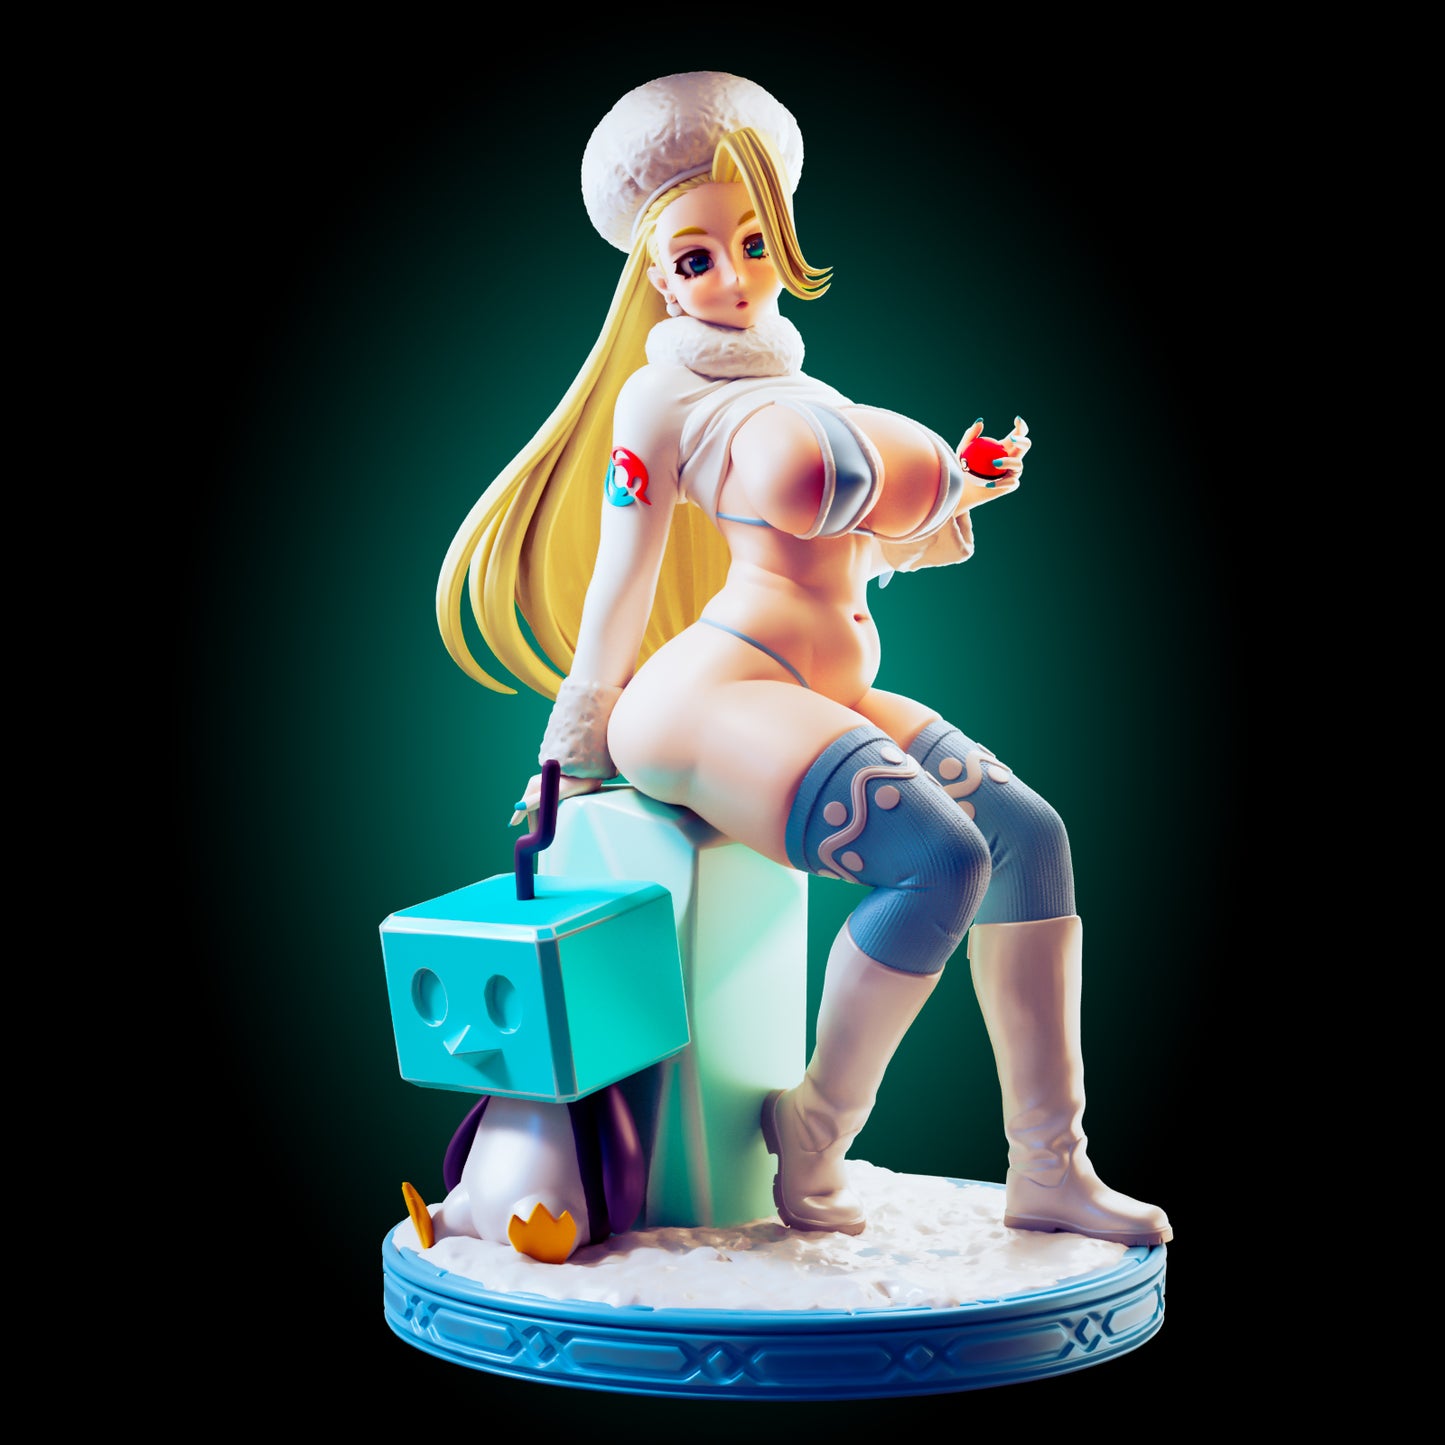 Melony from Pokemon from Officer Rhu Fan creation (FUTA editions are now available for all ADULT figures) Model Kit for painting and collecting.